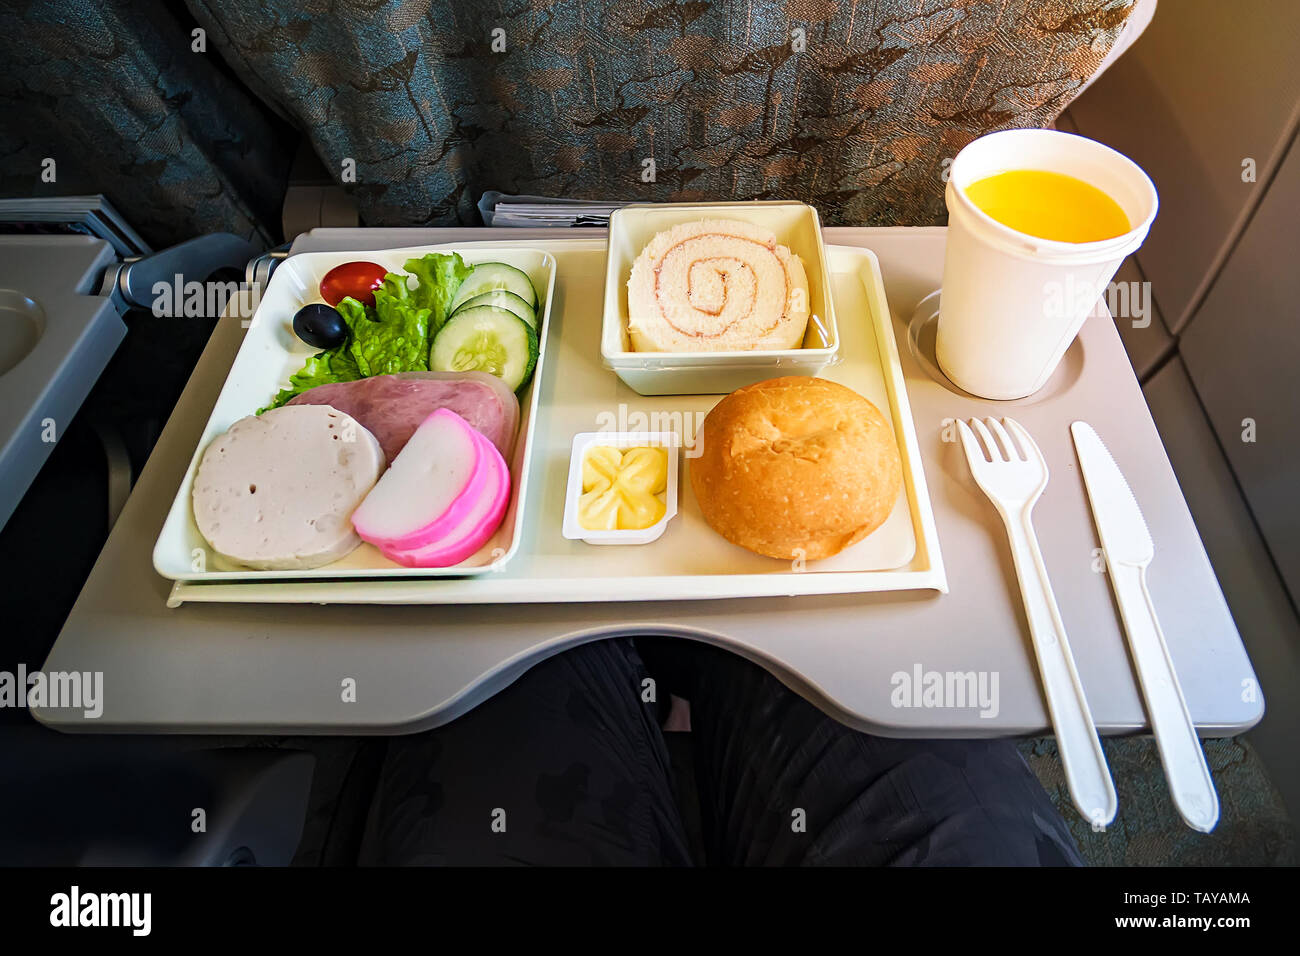 https://c8.alamy.com/comp/TAYAMA/inflight-meal-service-tray-for-economy-class-meat-fruit-salad-cucumber-a-glass-of-juice-and-butter-fork-and-knife-made-of-plastic-for-safety-TAYAMA.jpg